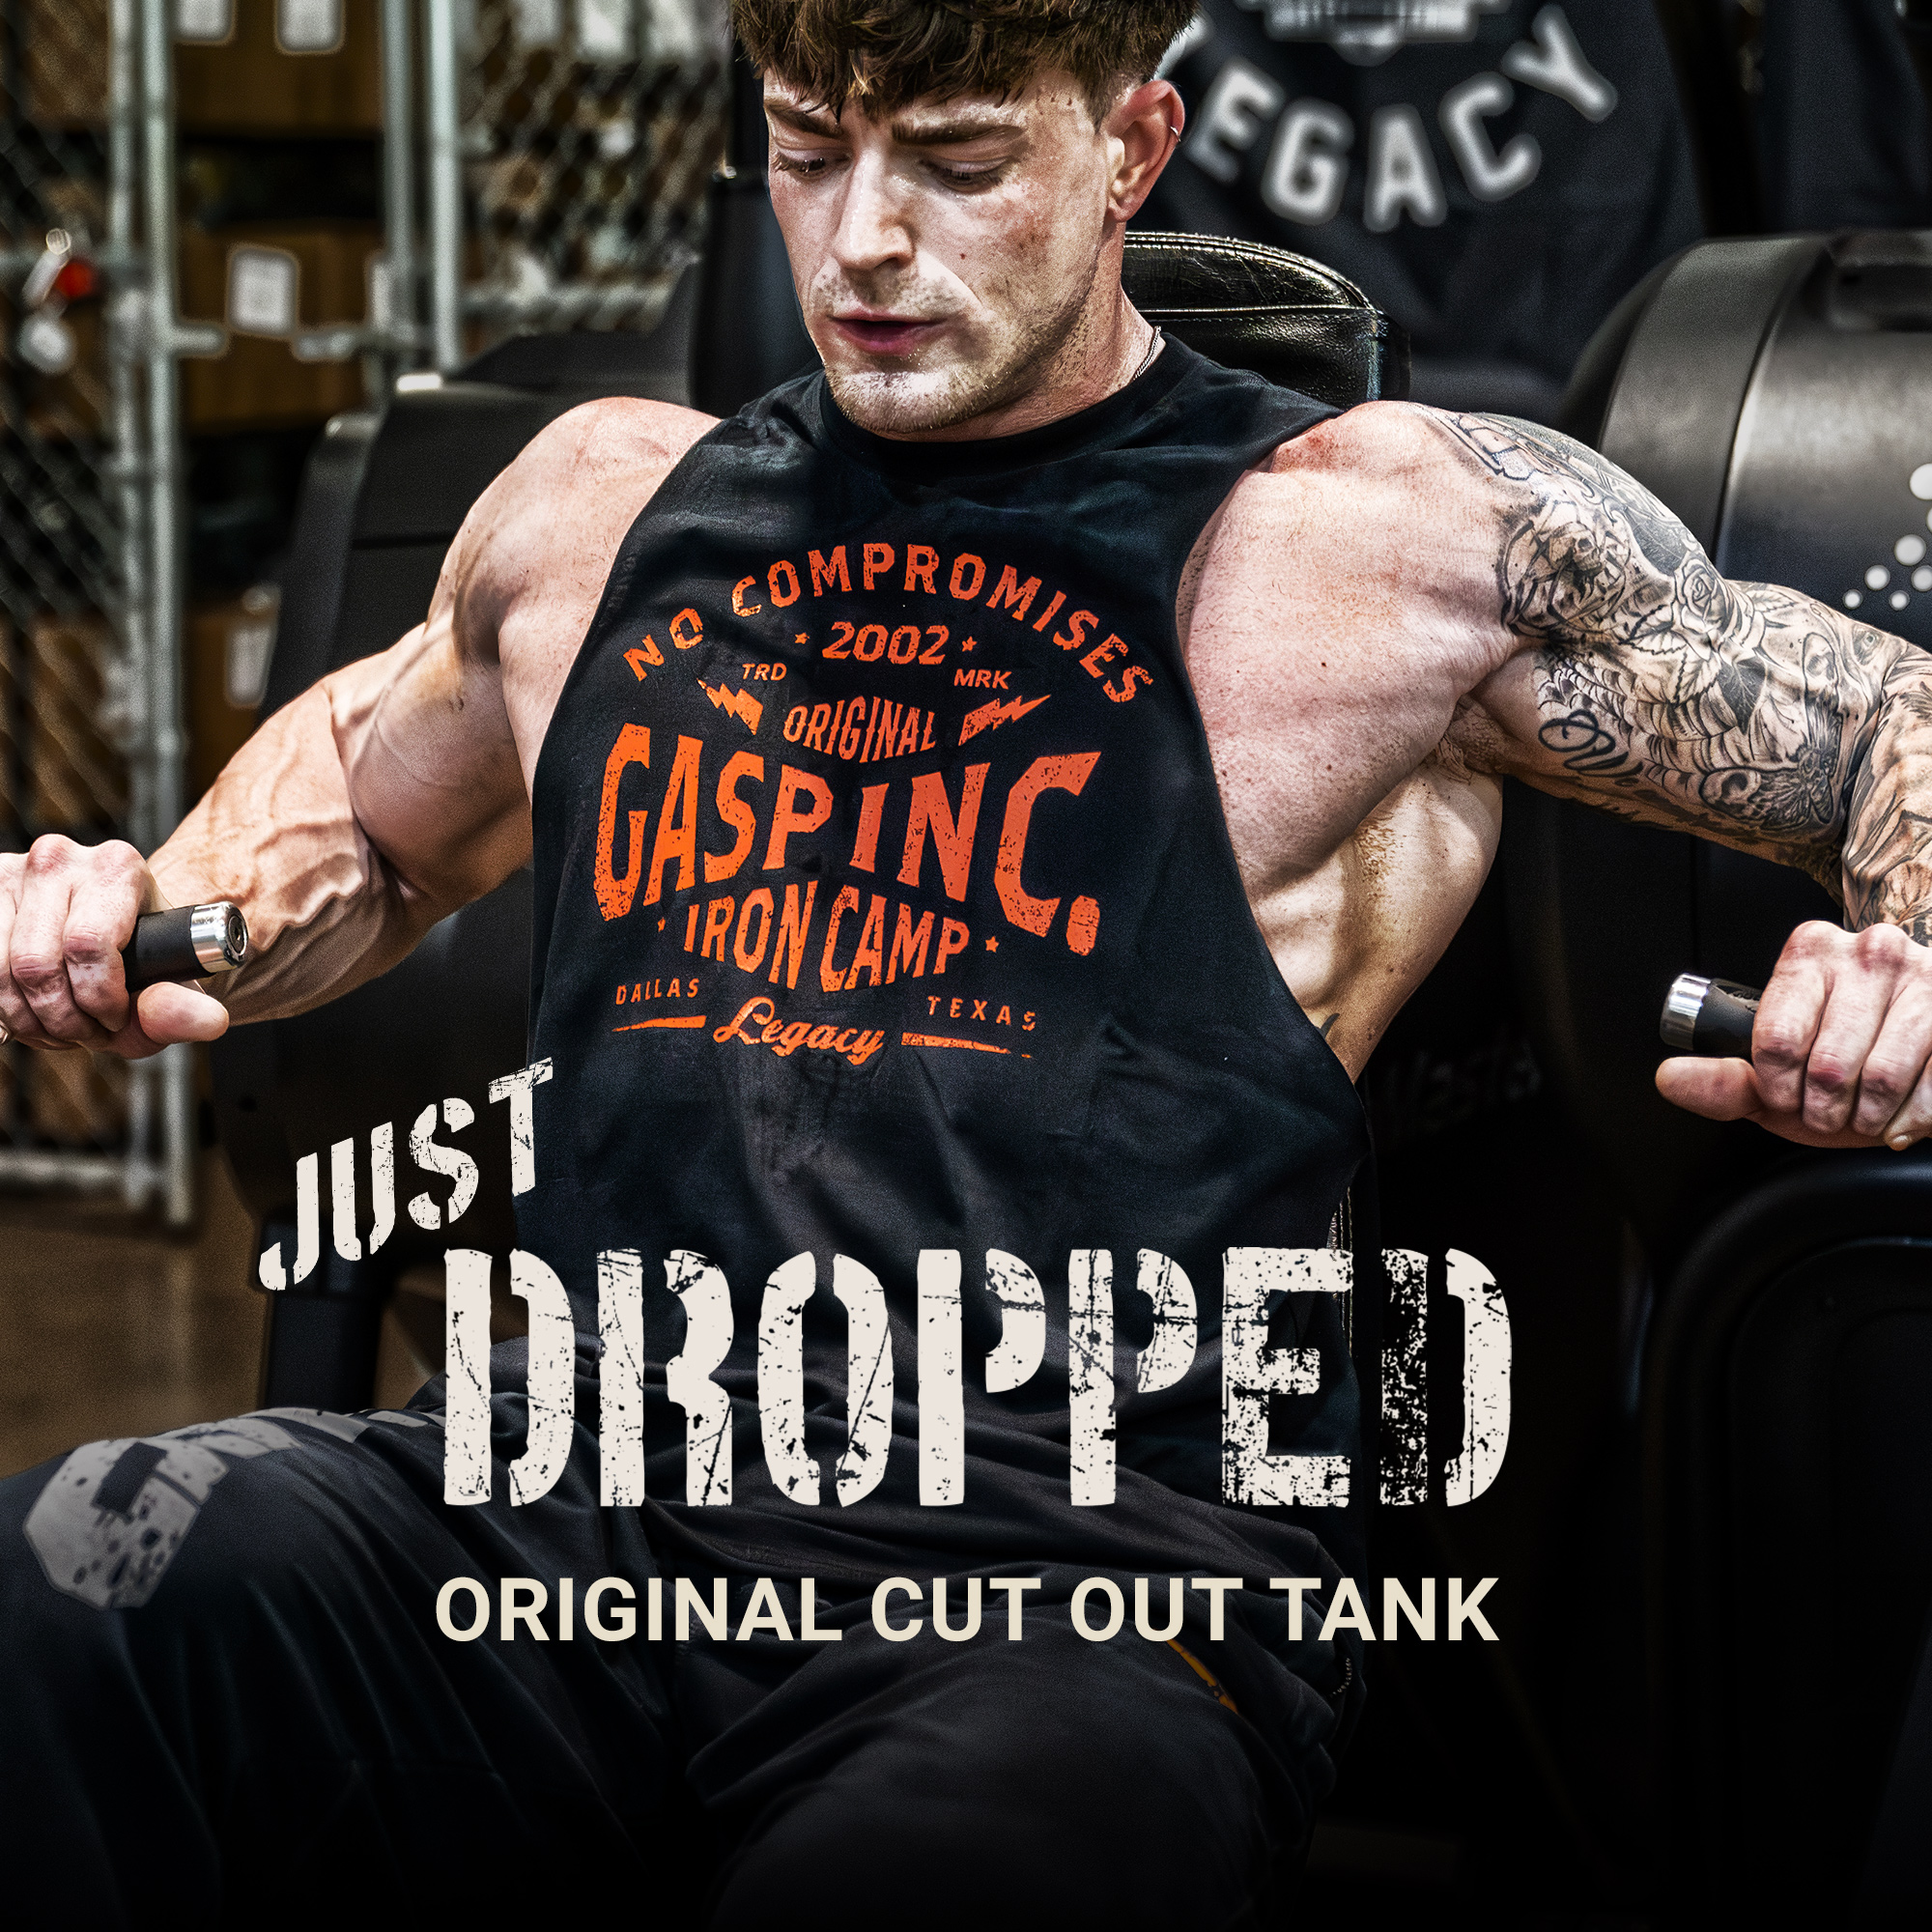 GASP - Bodybuilding Clothing | Gym Clothes & Weightlifting Apparel